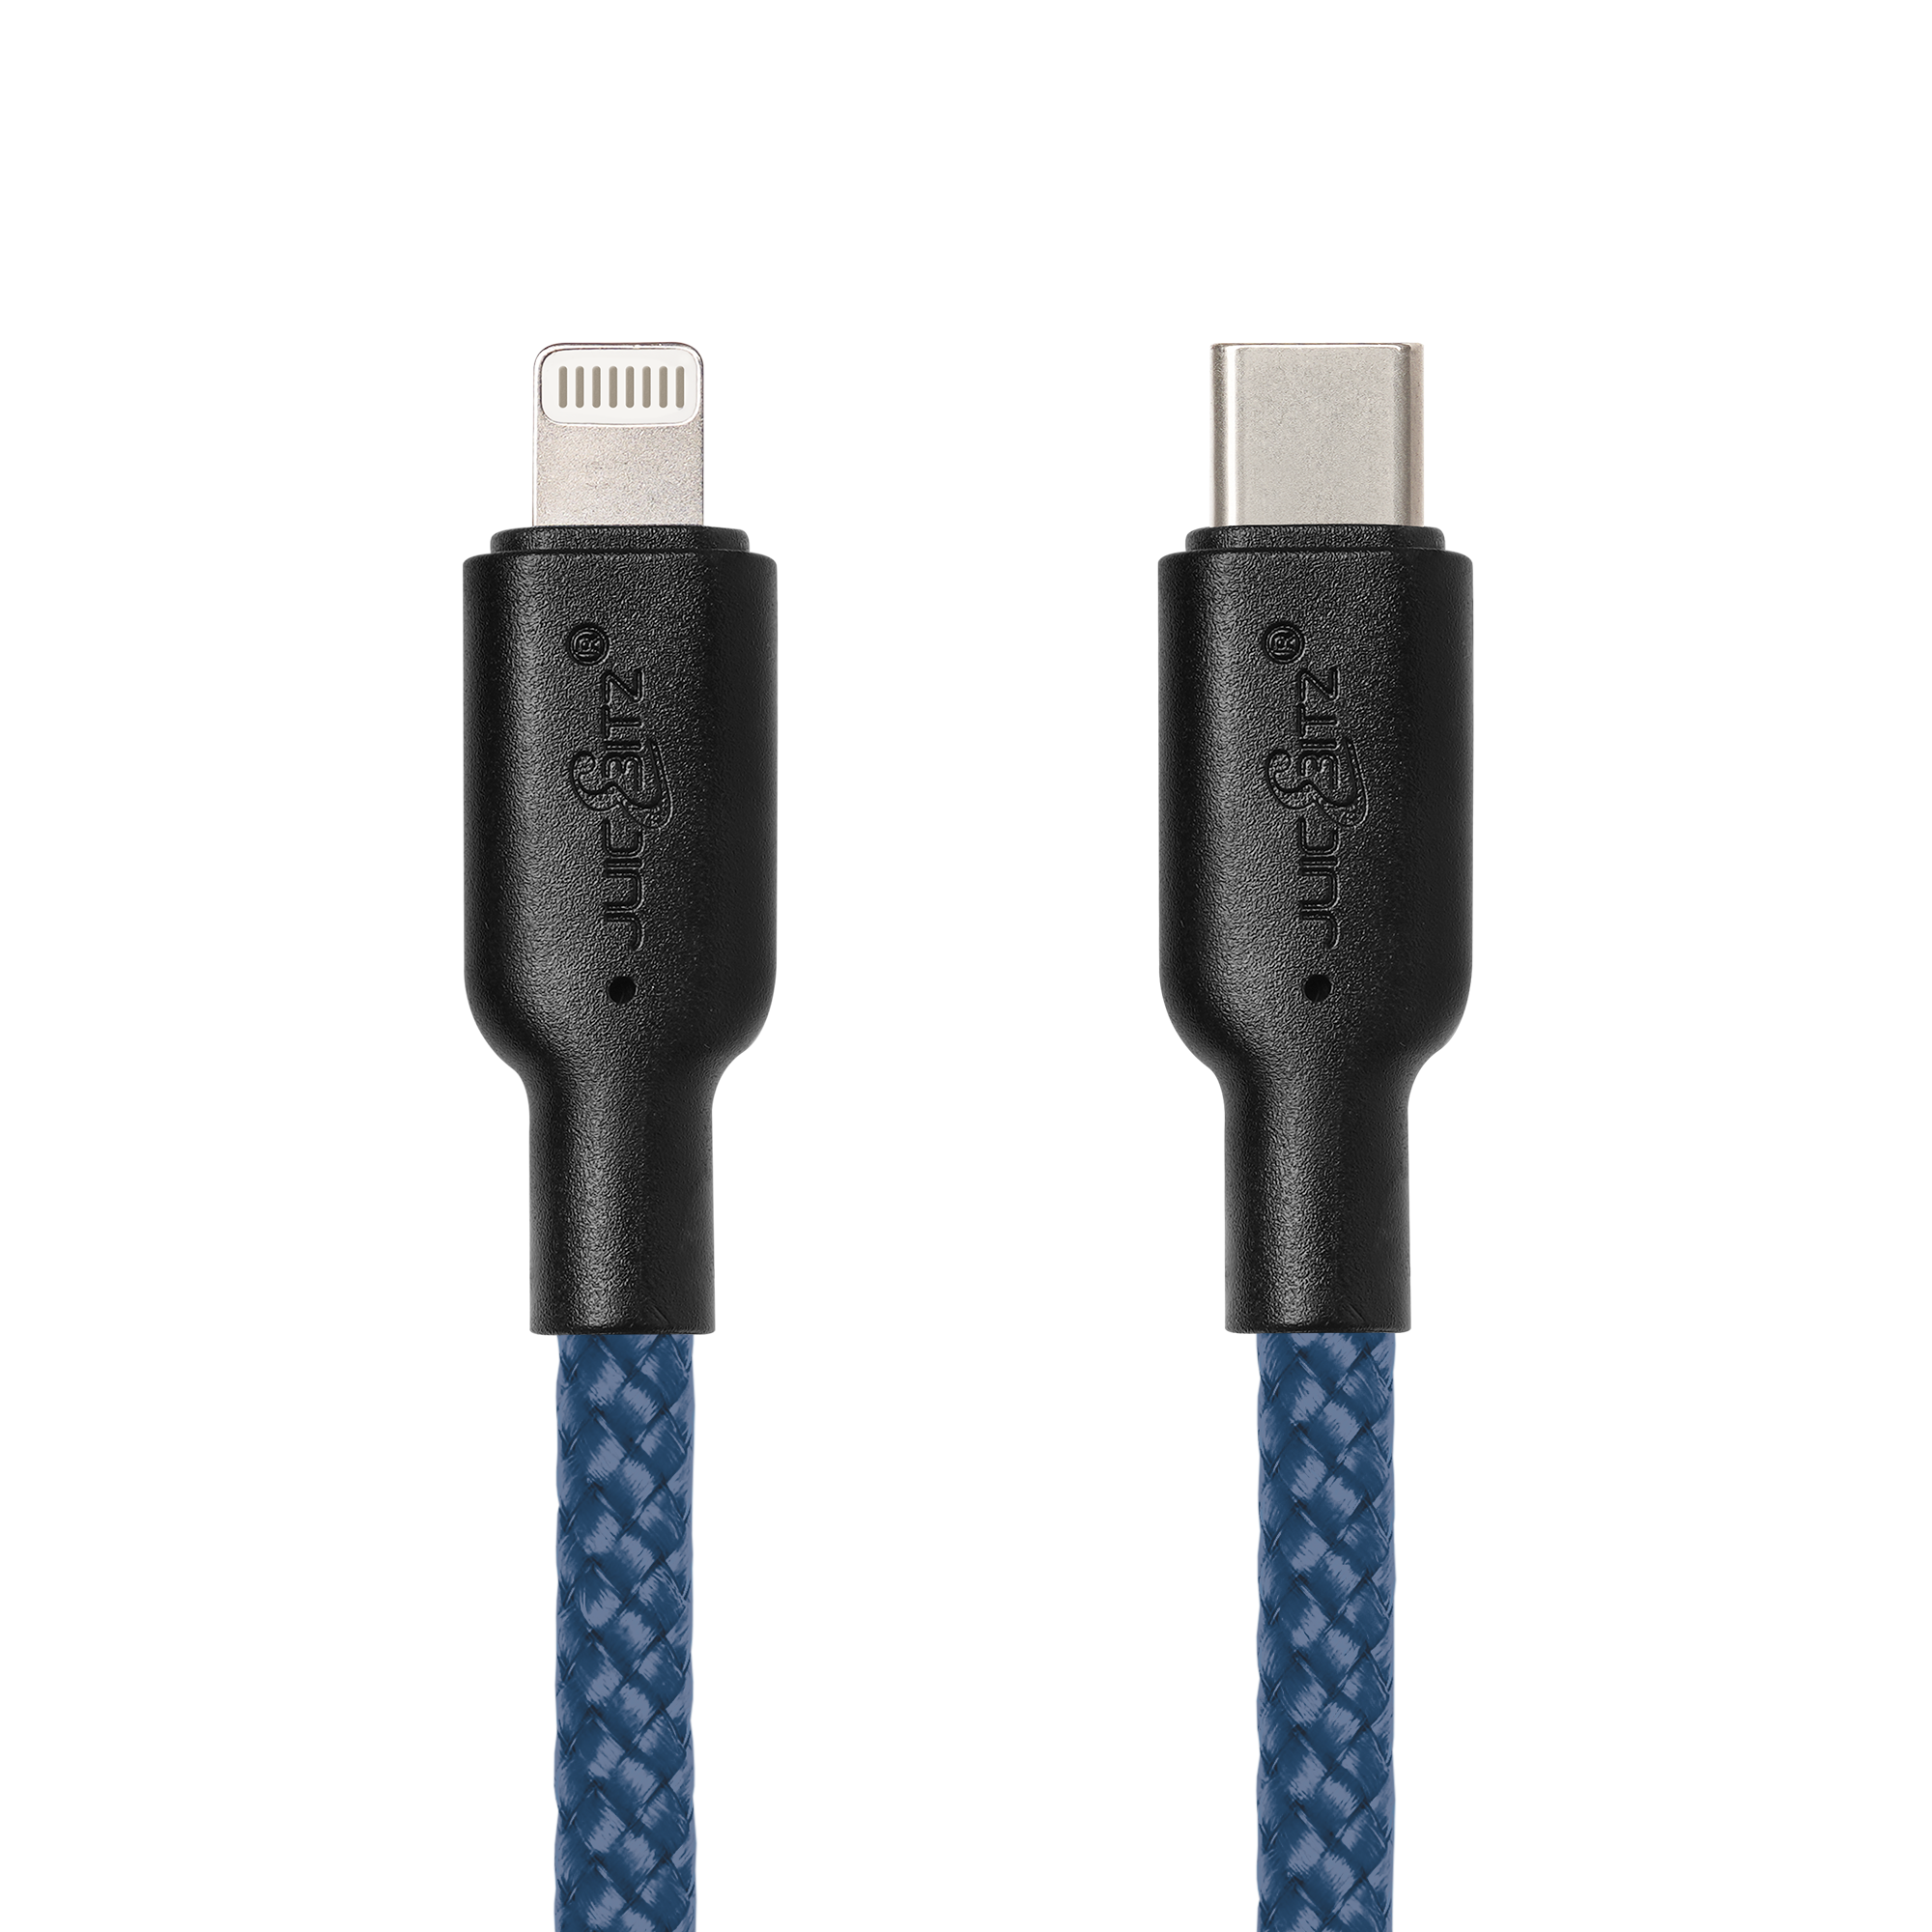 Braided Heavy Duty USB-C Fast Charger Data Sync Cable for iPhone, iPad, iPod - Navy